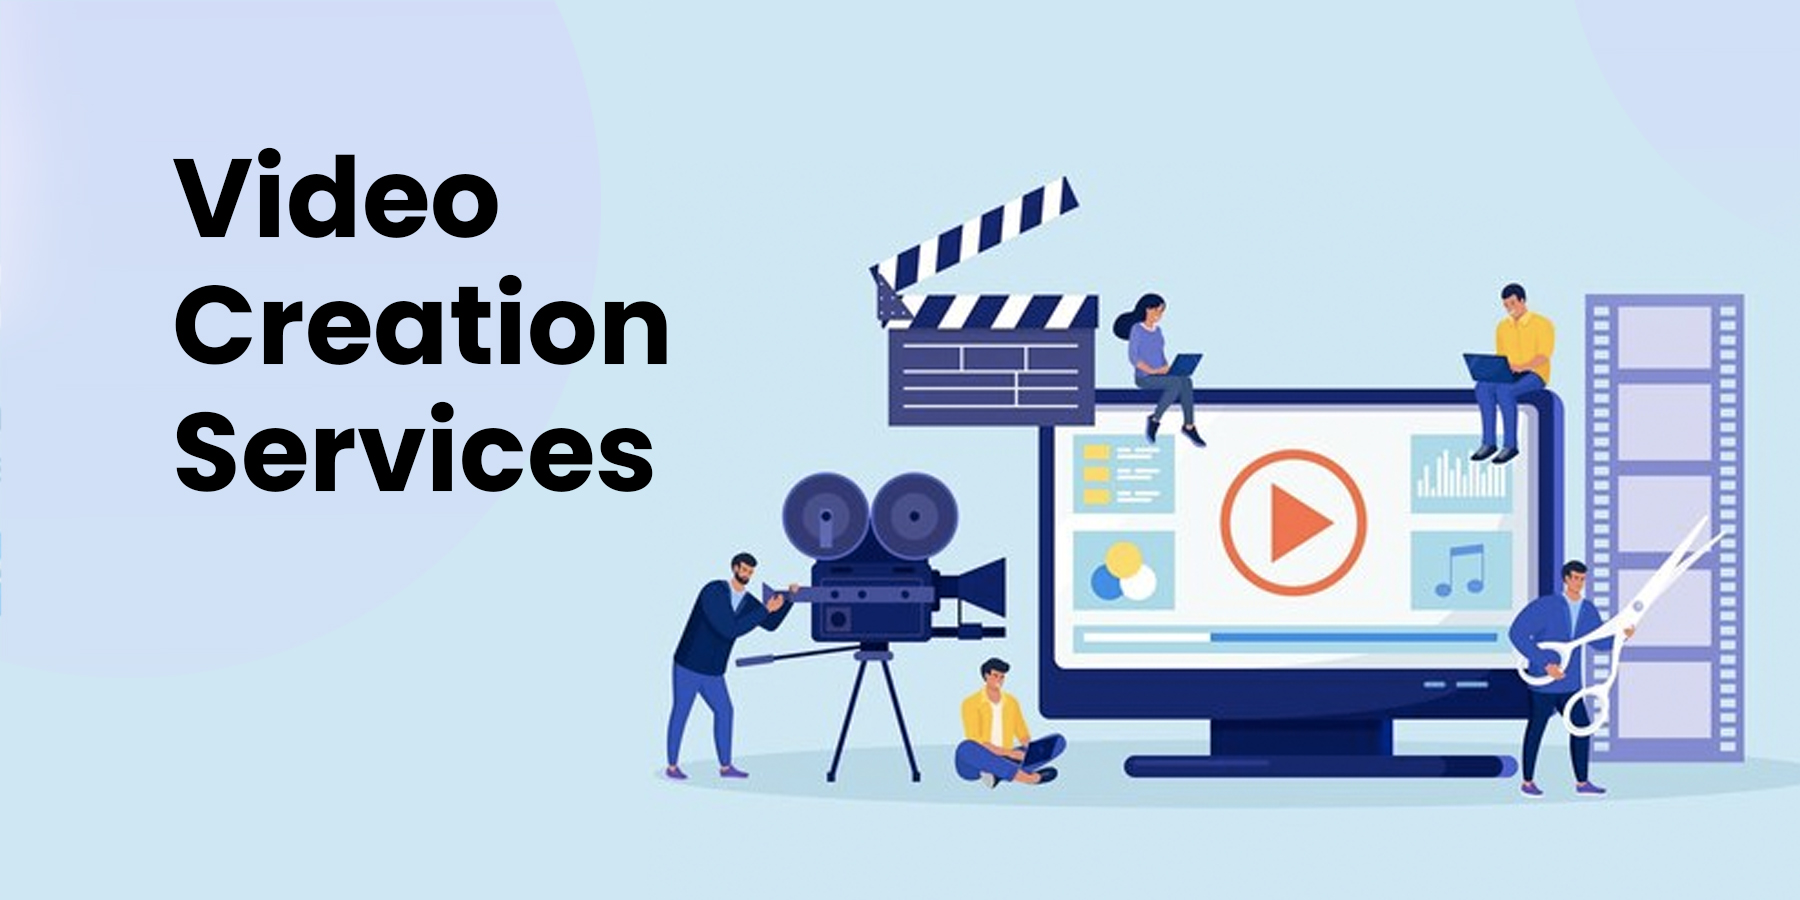 Video Creation Services